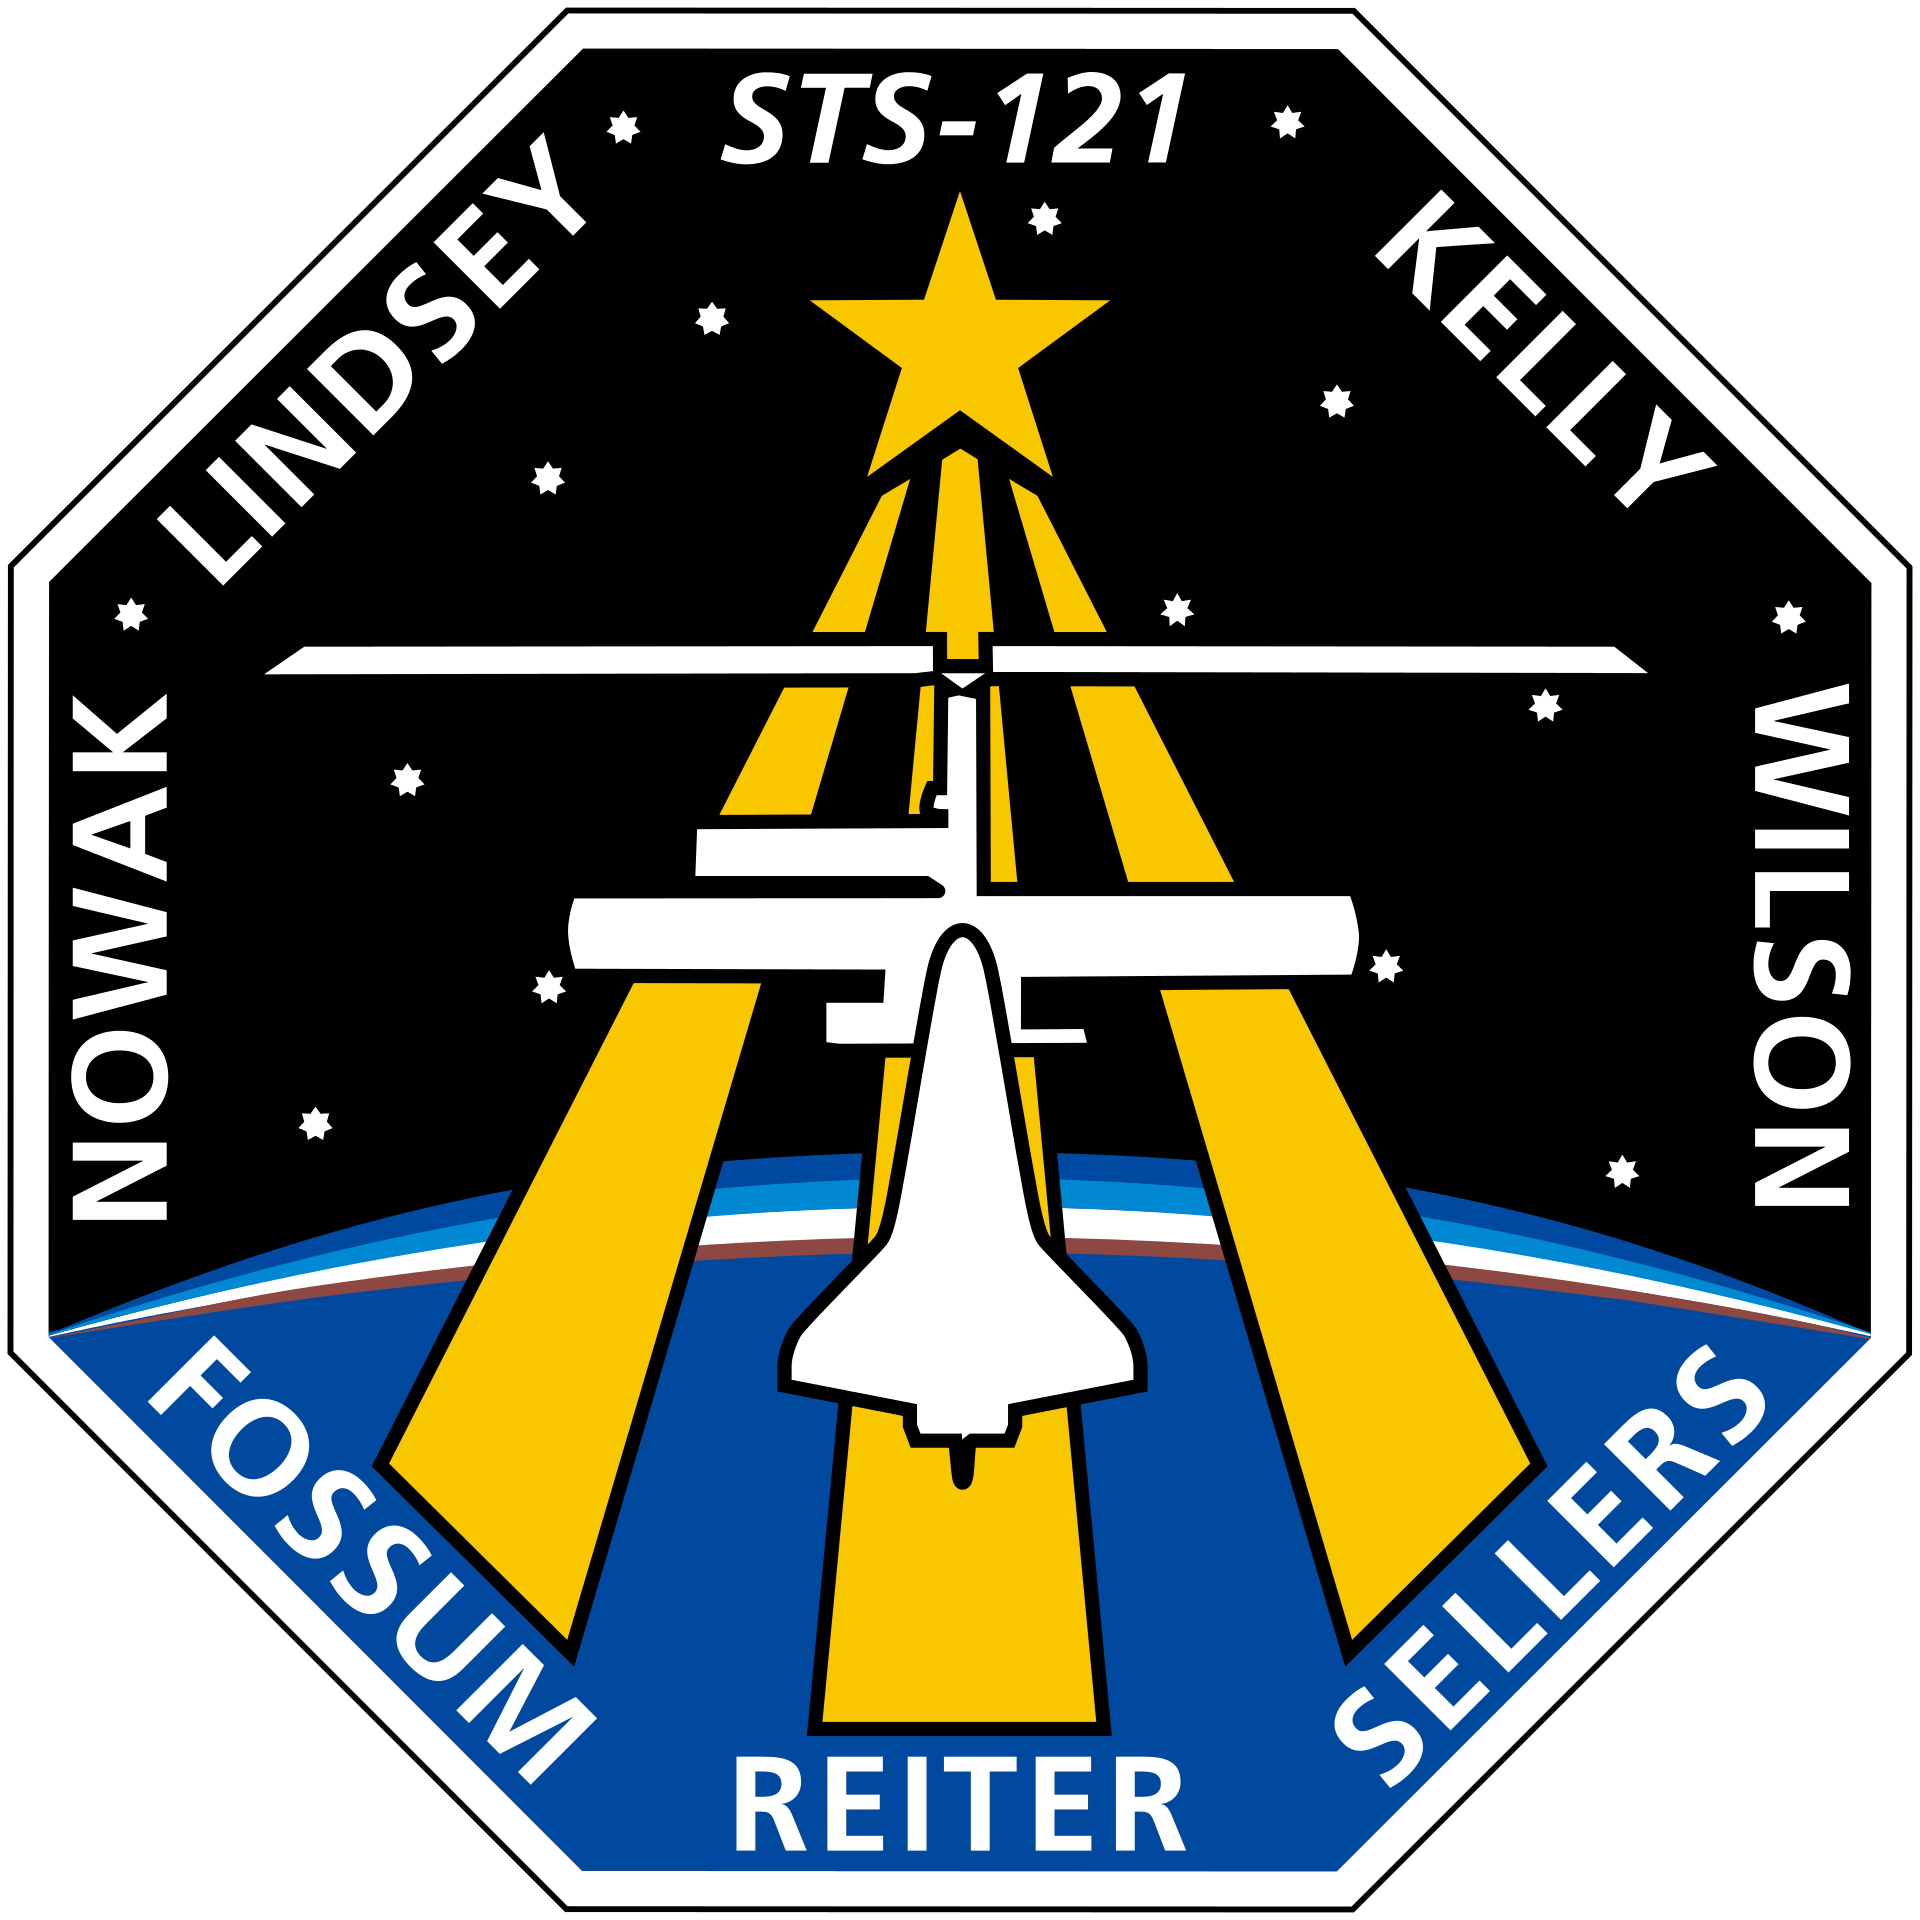 Mission patch for STS-121